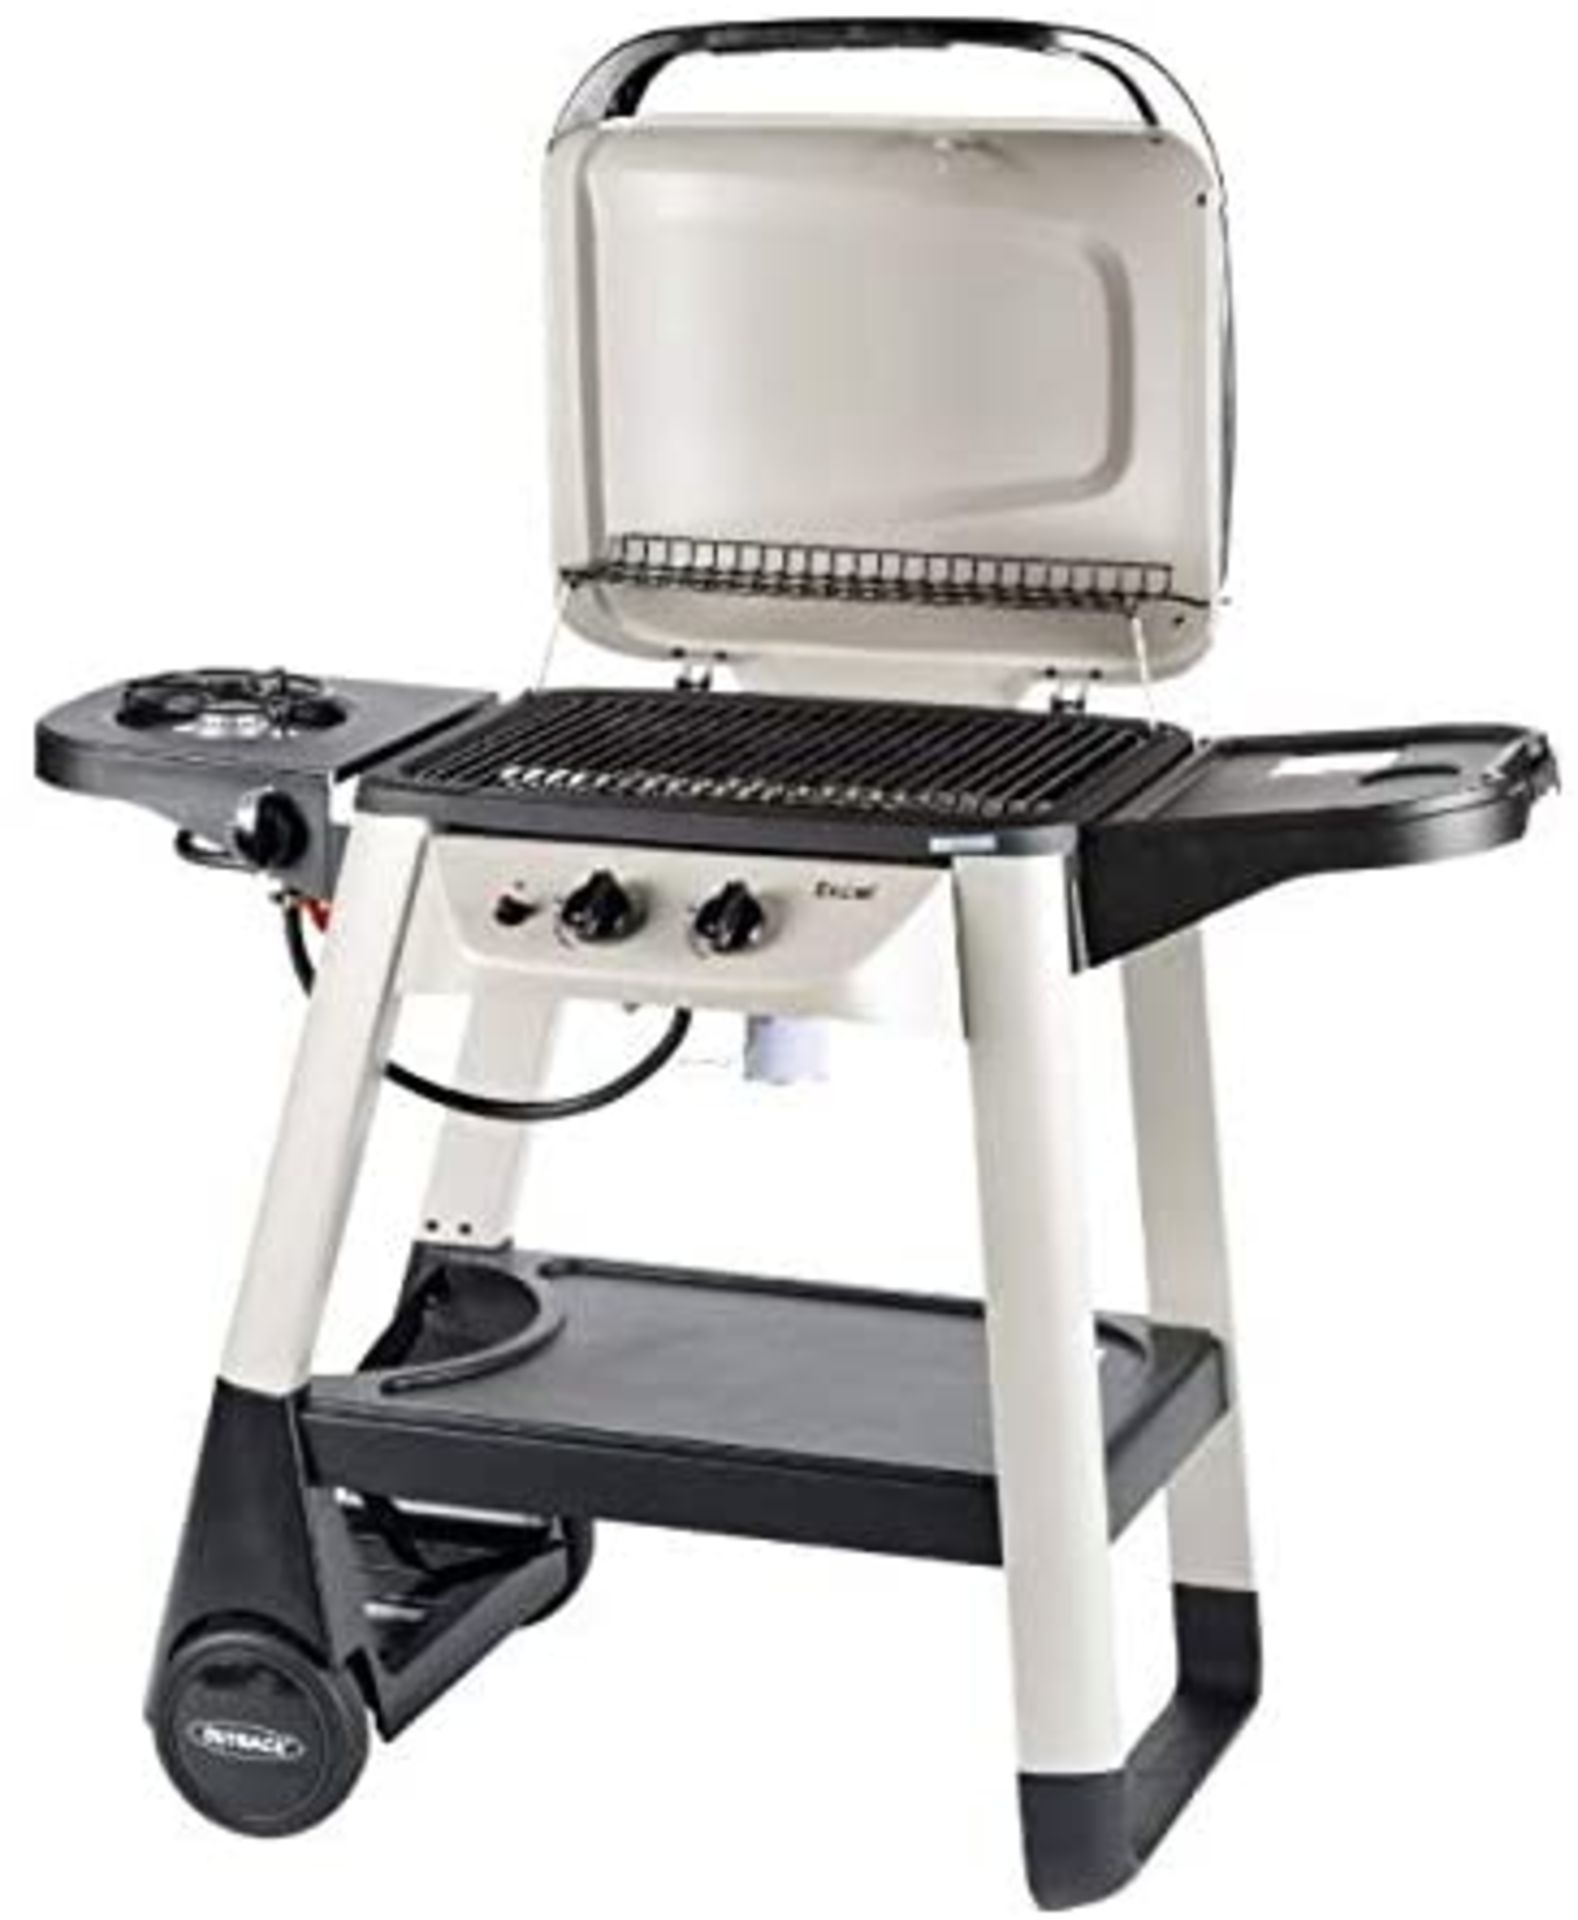 (P7) 1x Outback Excel 310 Gas BBQ Silver RRP £100. New, Sealed Unit, With Very Slight Damage To Box - Image 2 of 4